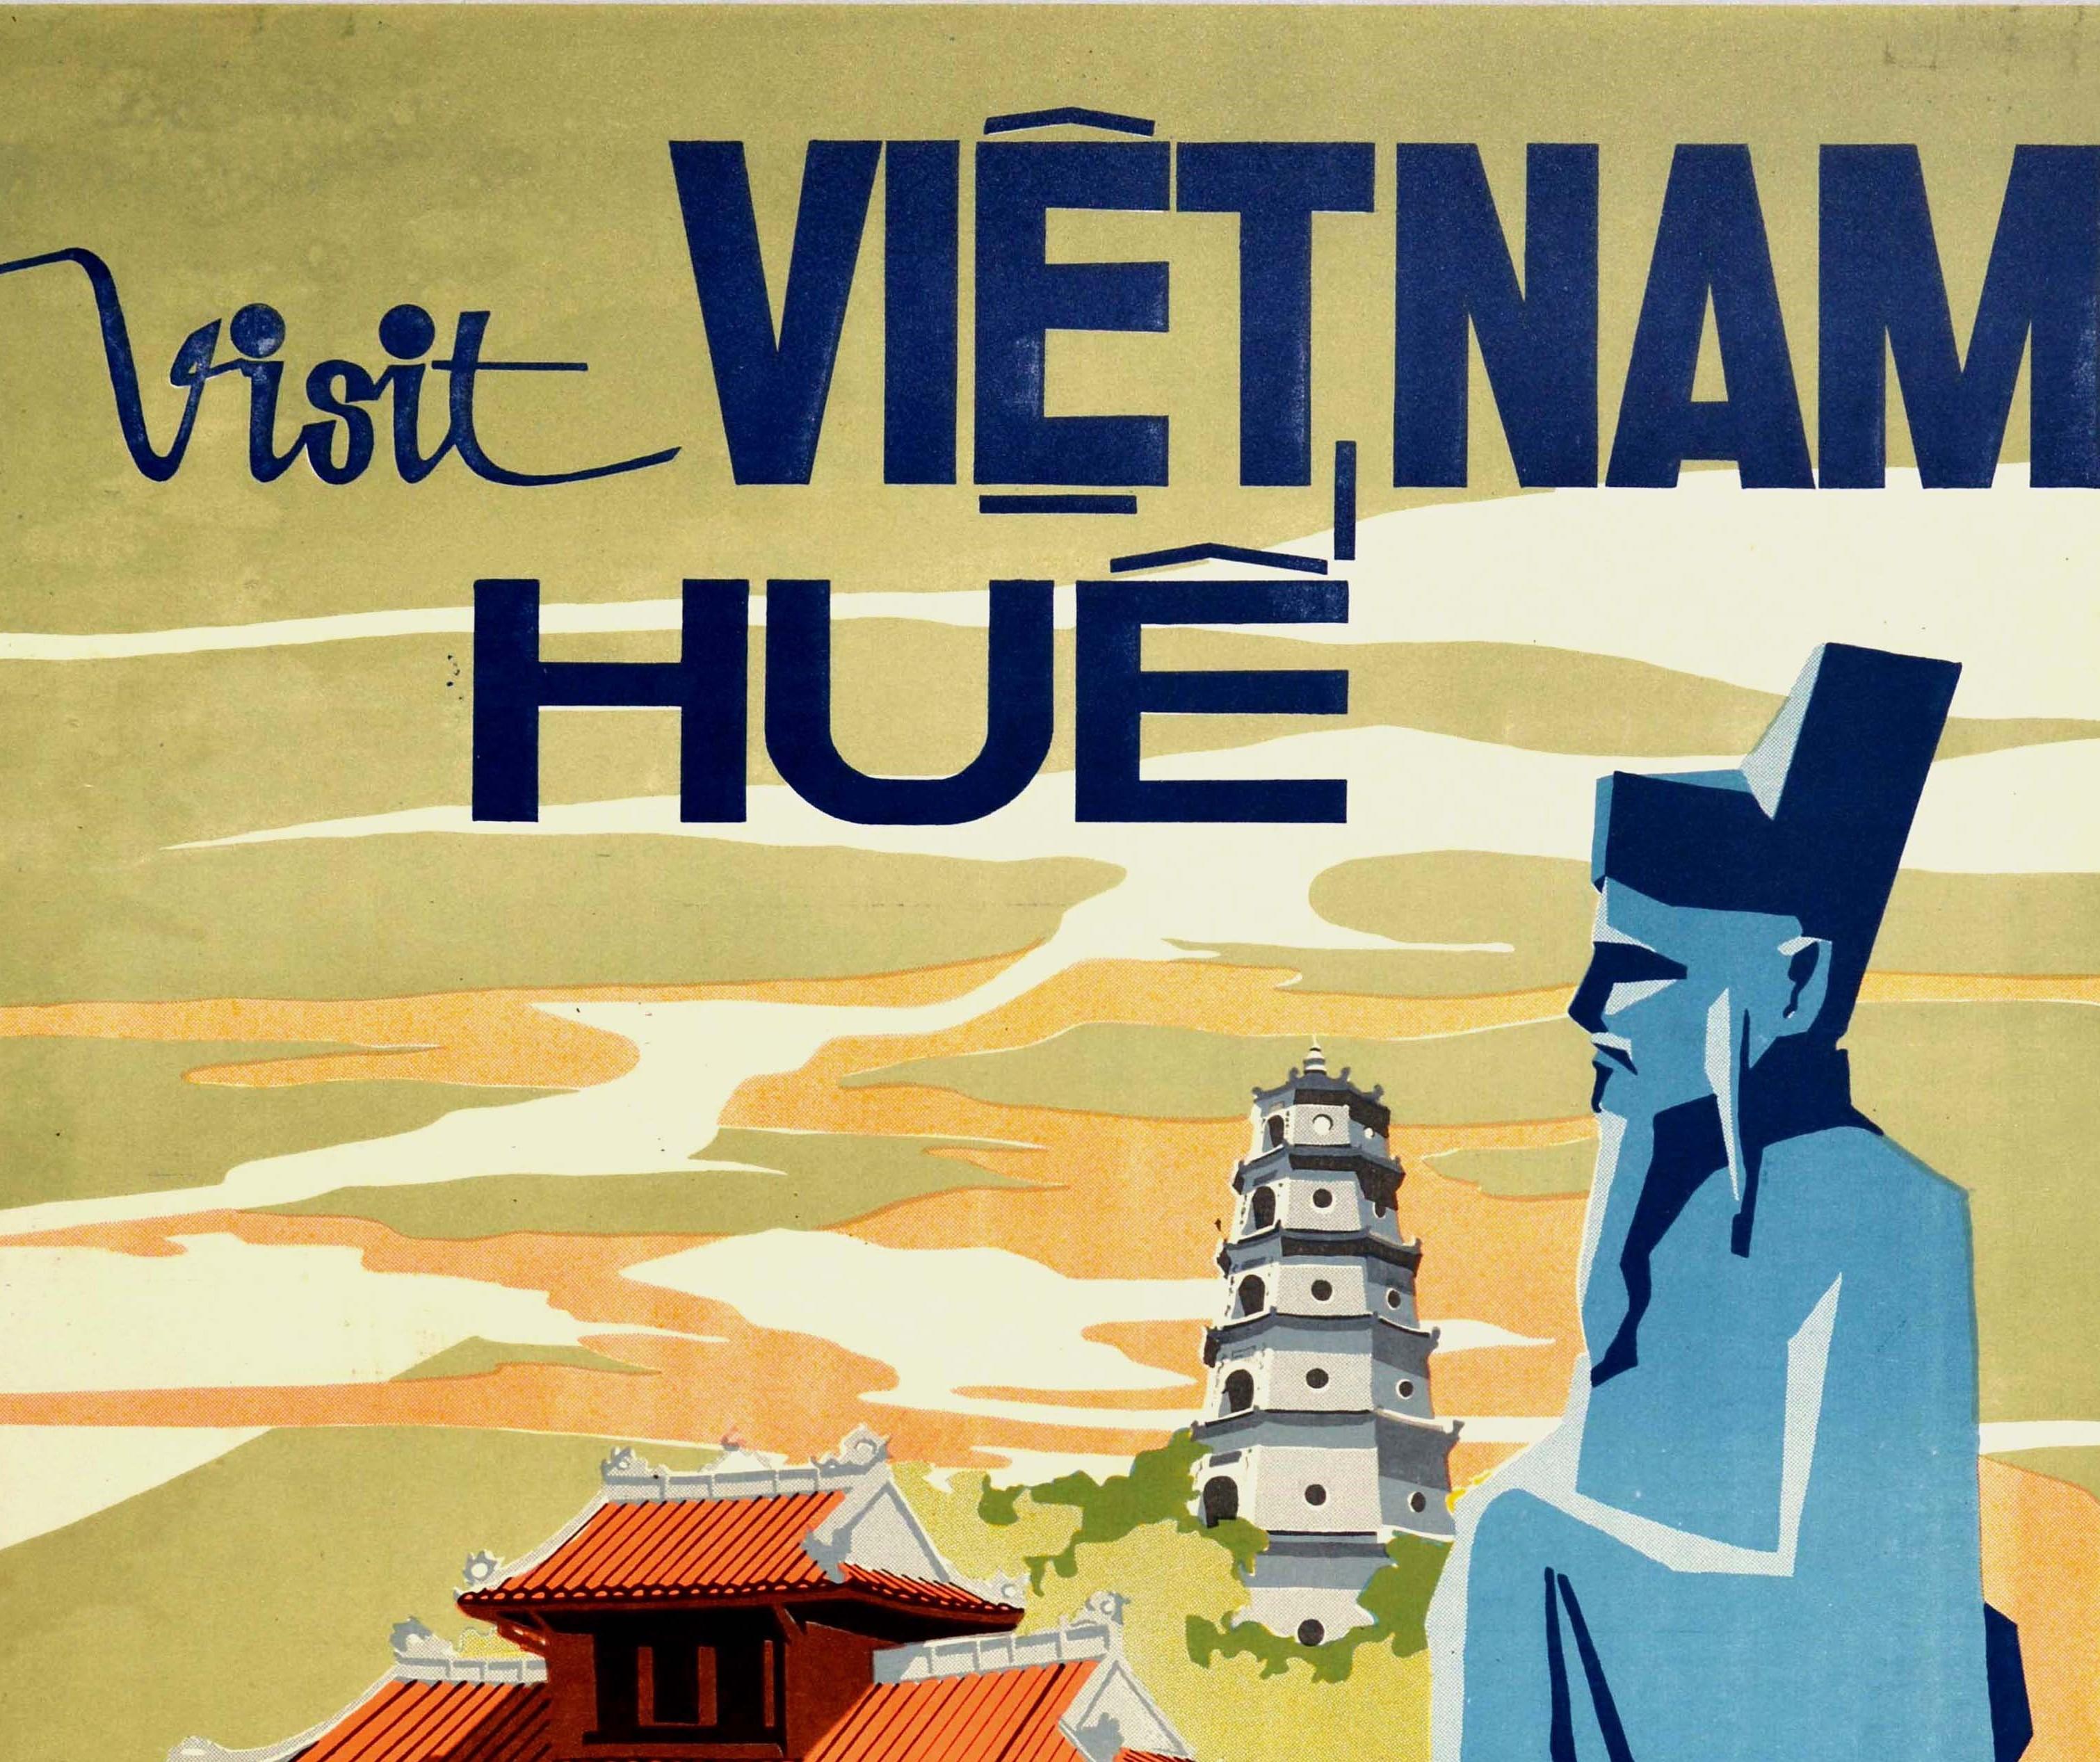 Original vintage travel poster - Visit Vietnam Hue - featuring a colourful midcentury design of an Imperial Palace with the historic Chua Thien M? aka Thien Mu / Pagoda of the Celestial Lady and one of the statues from the Lang Khai D?nh / Khai Dinh